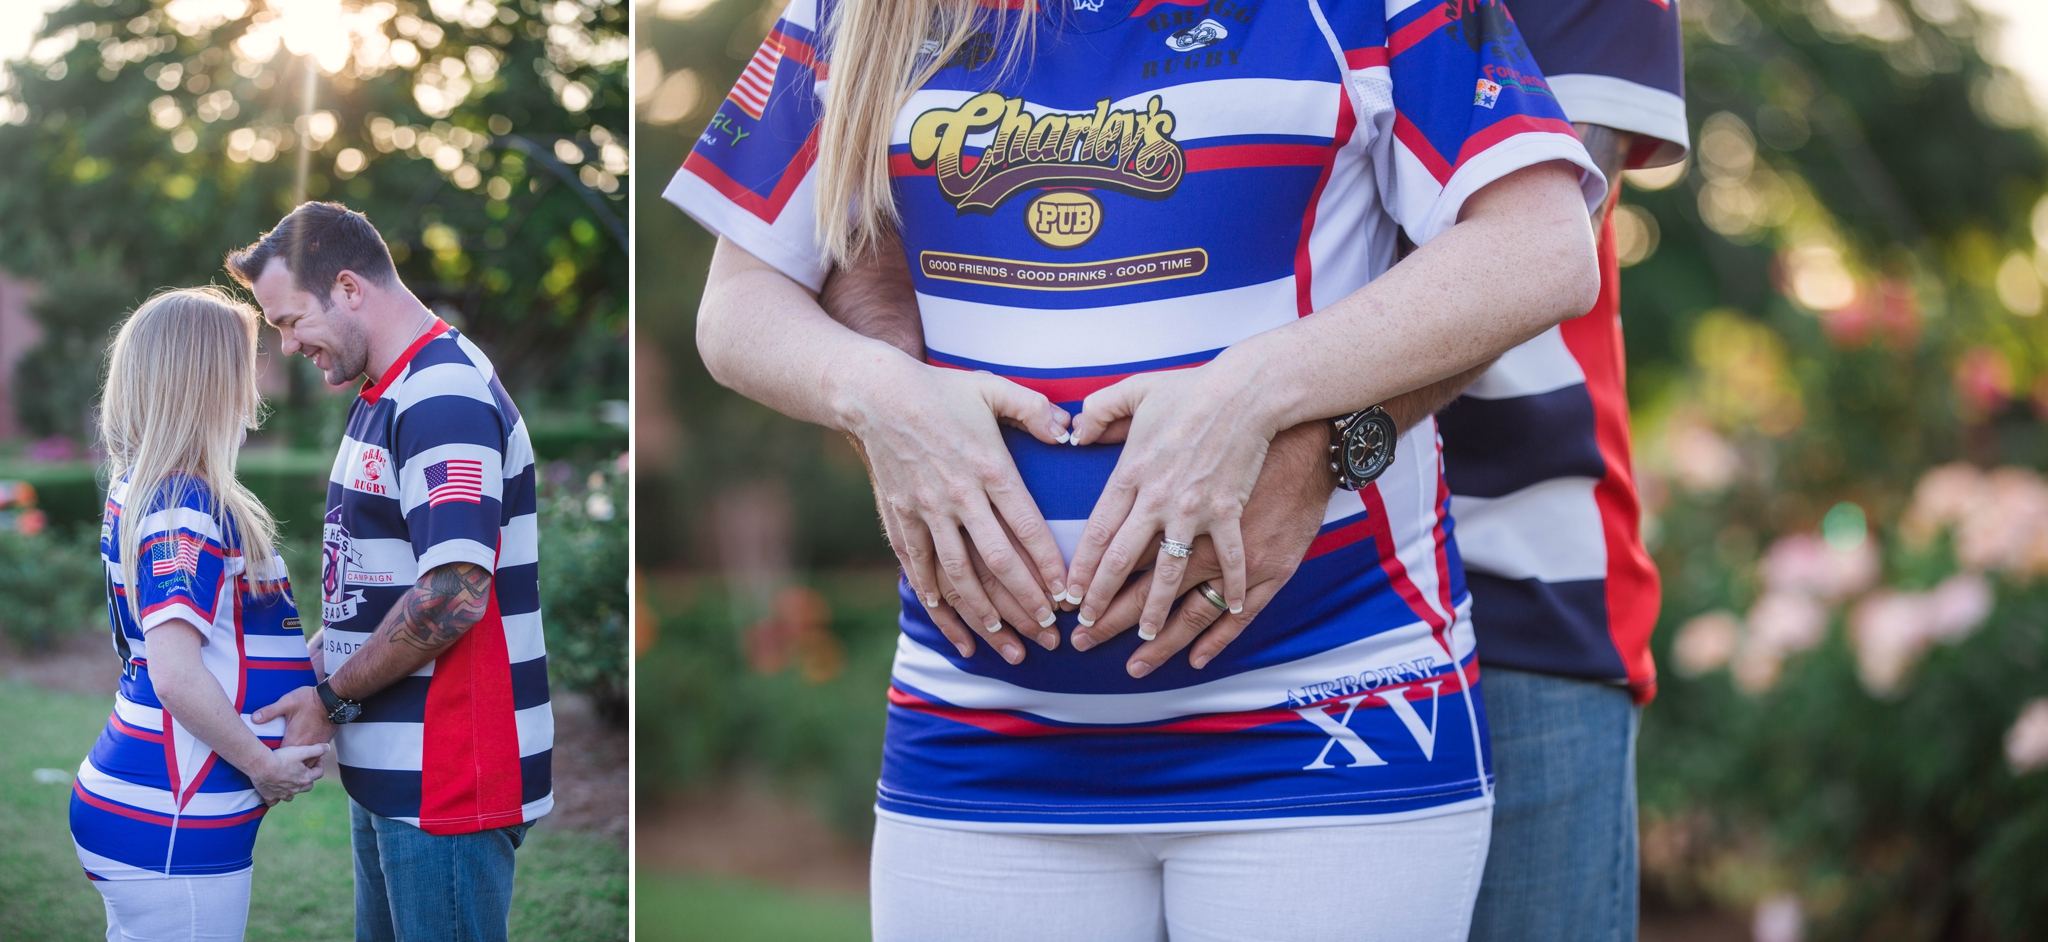 Military Family Maternity Photography Session at the FTCC Rose Garden in Fayetteville, NC - Raleigh North Carolina Photographer - Johanna Dye 